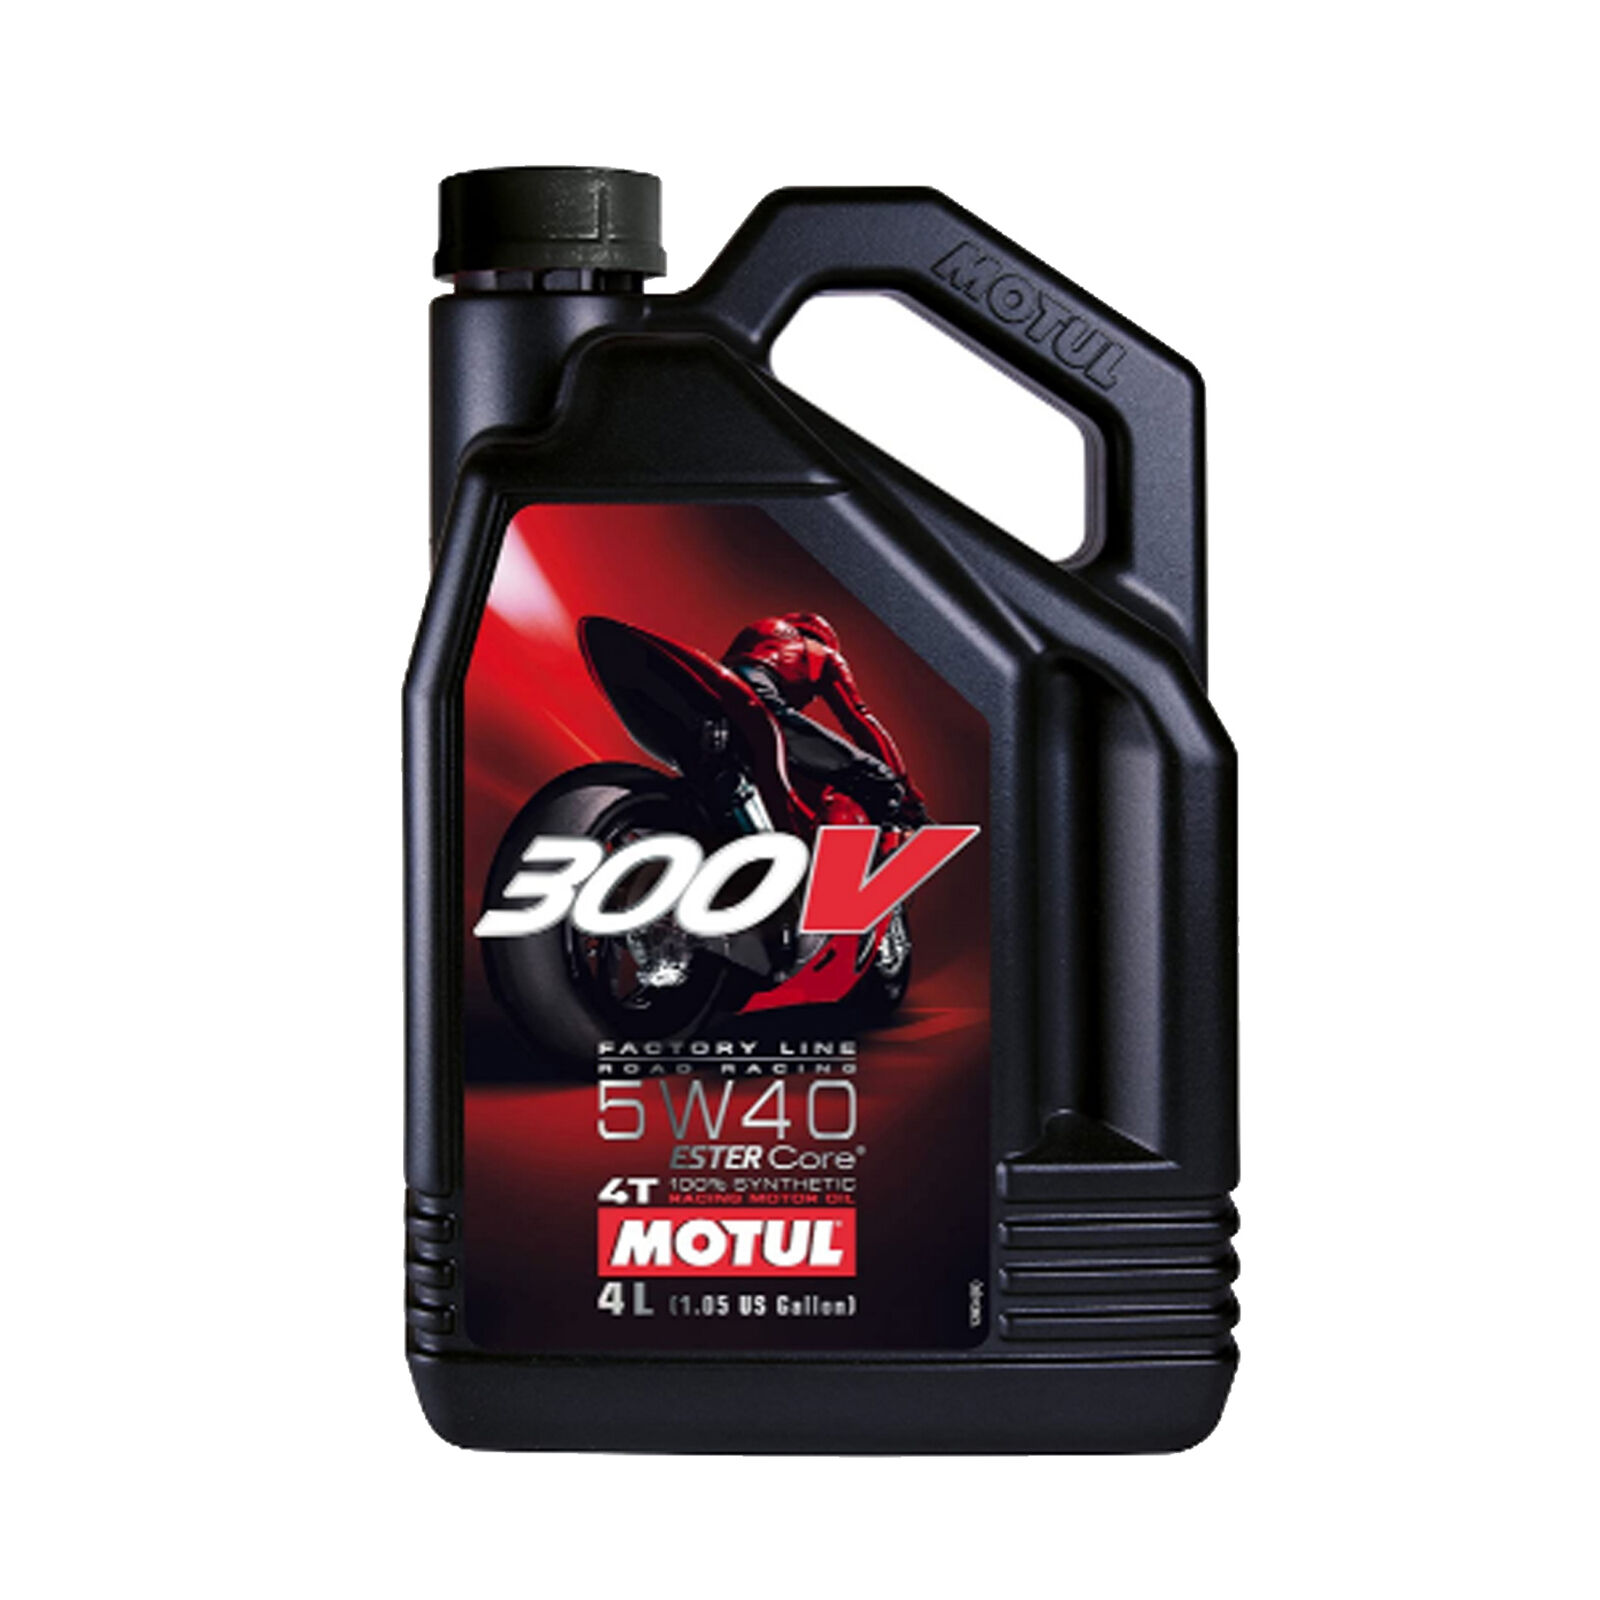 Motul 300V Synthetic Factory Line Road Racing Motorcycle Oil 5W-40 4L 104115